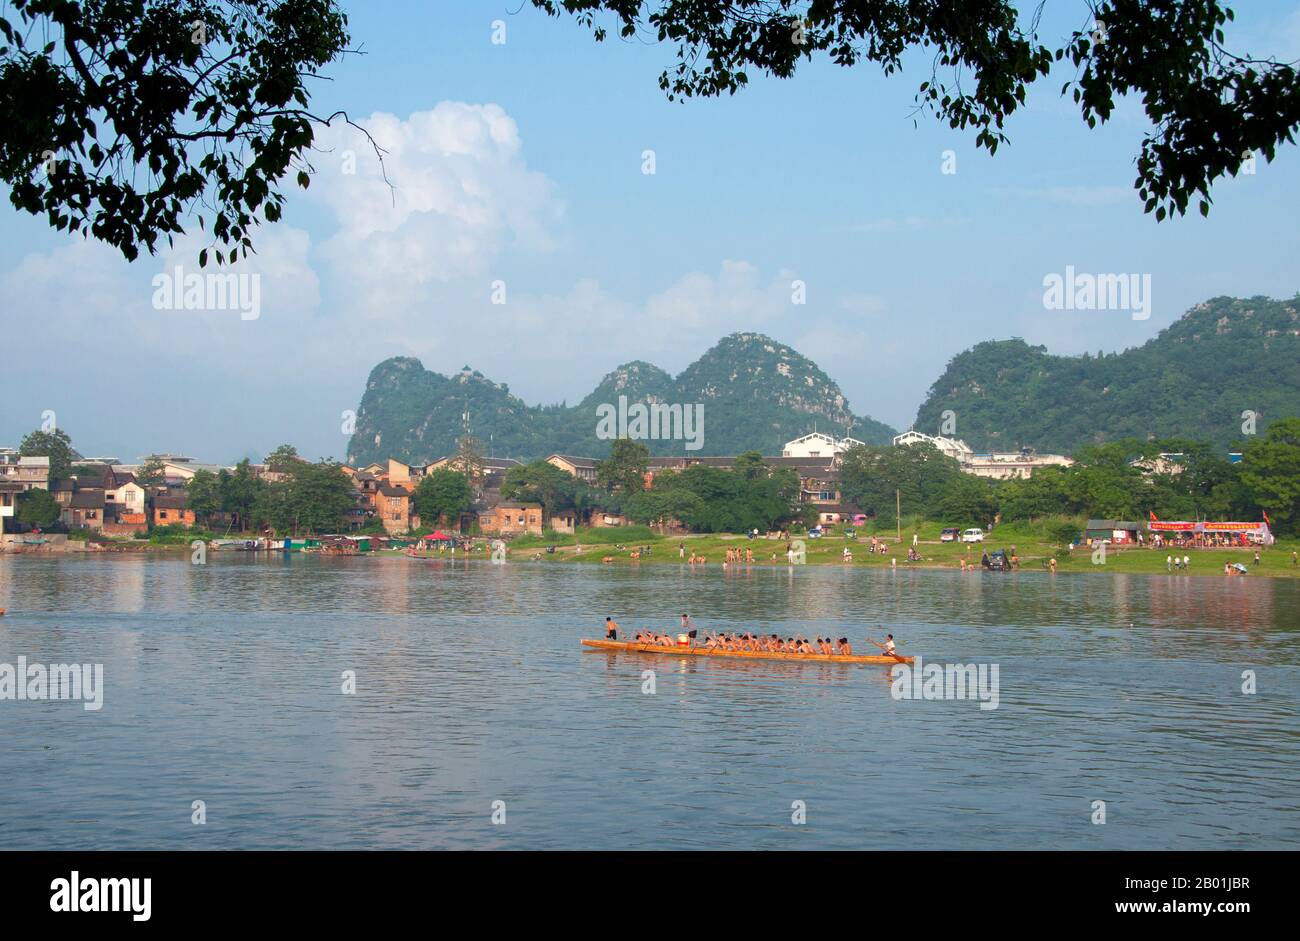 China: Dragon boat on the Li River with Seven Star Park in the background, Guilin, Guangxi Province.  Guilin's Dragon Boat Festival is held on the fifth day of the fifth month (May) of the Chinese lunar calendar every 3 years. The festival was originally held in memory of the great Chinese poet, Quyuan.  The name Guilin means ‘Cassia Woods’ and is named after the osmanthus (cassia) blossoms that bloom throughout the autumn period.  Guilin is the scene of China’s most famous landscapes, inspiring thousands of paintings over many centuries. Stock Photo